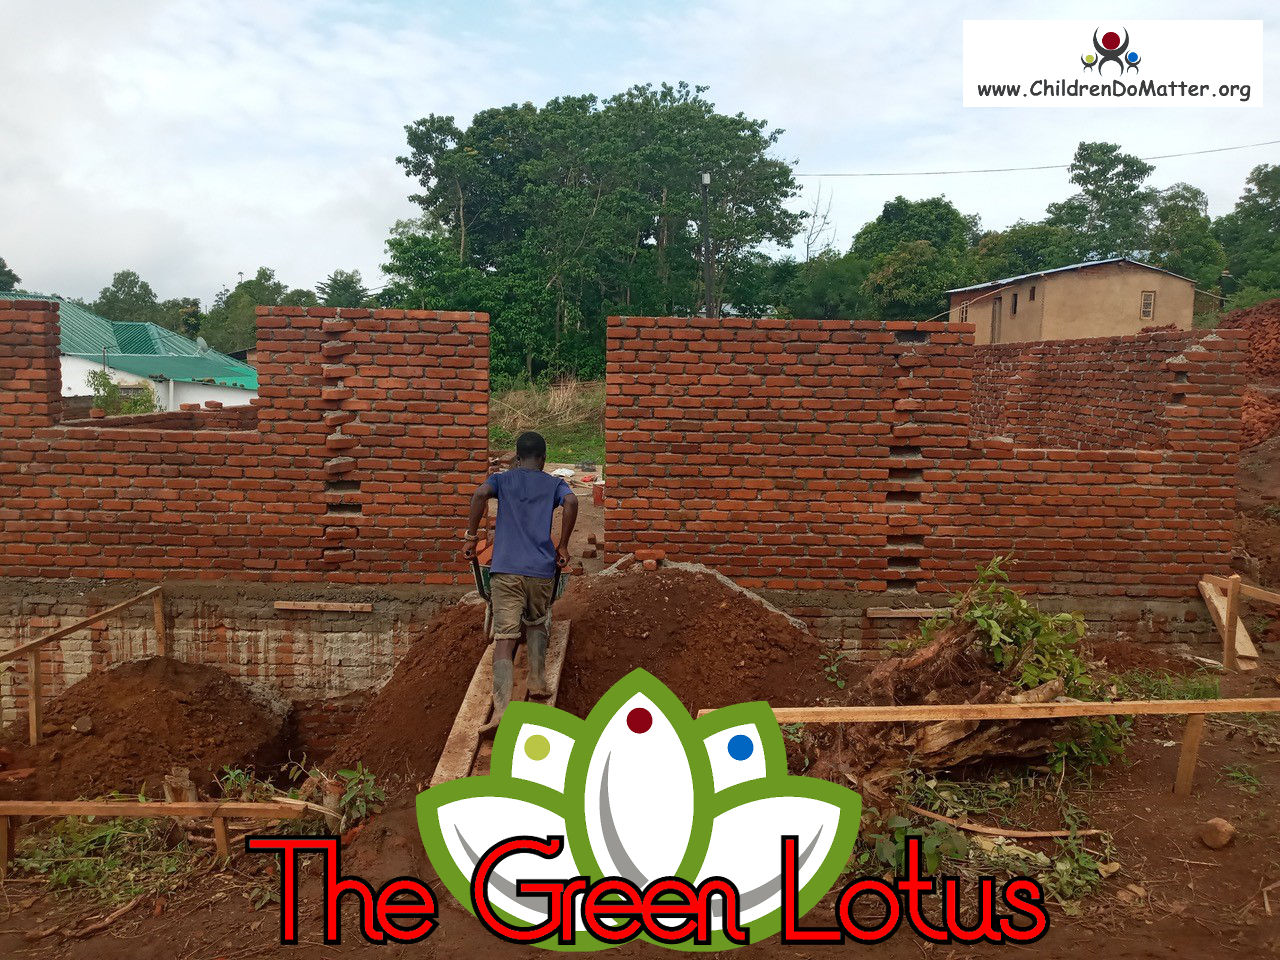 the making of the green lotus orphanage in blantyre malawi - children do matter - 12